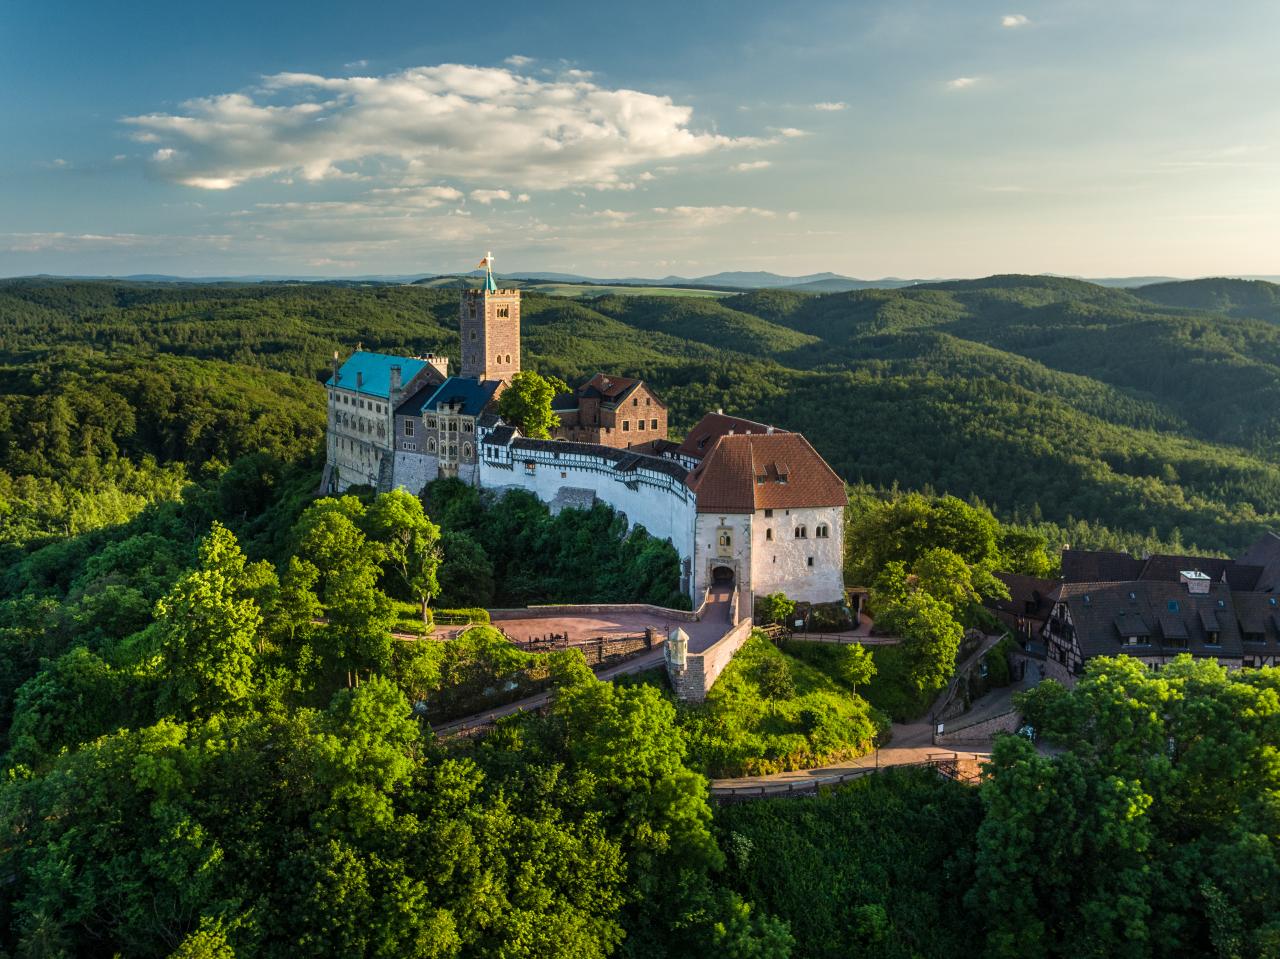 Far-sightedness: The beautiful Wartburg Castle is visible from afar